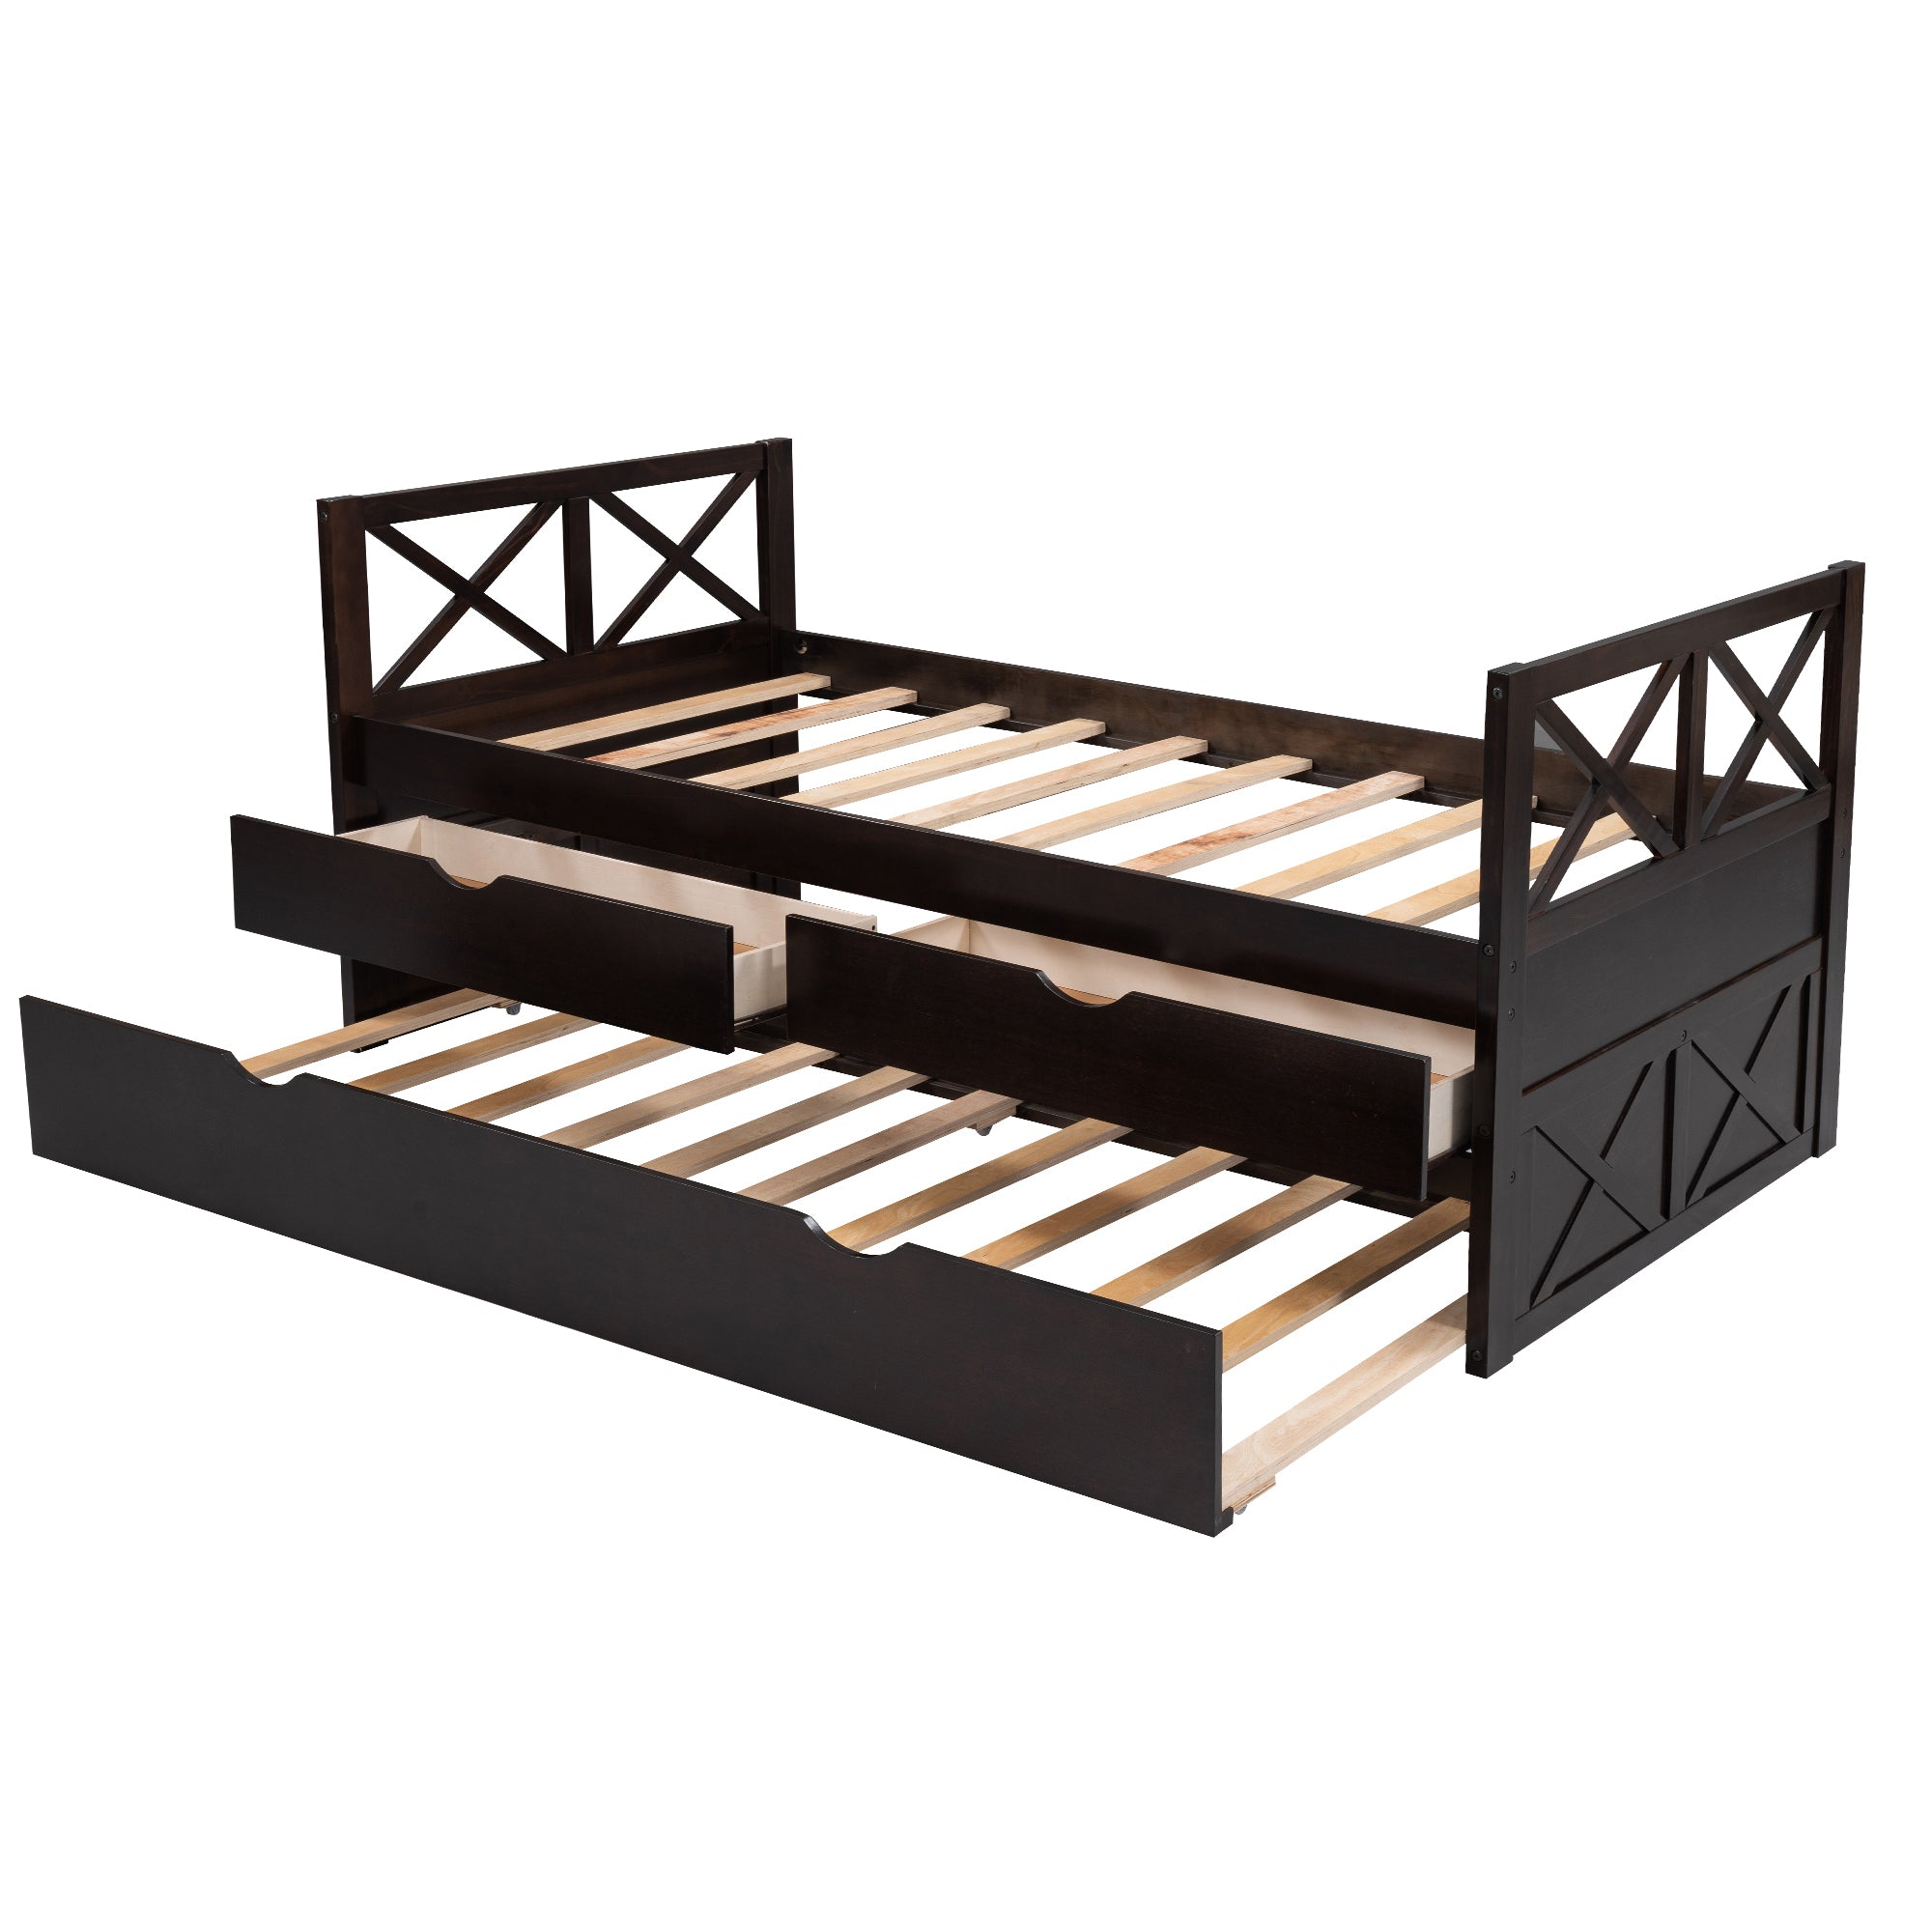 Multi-Functional Daybed with Drawers and Trundle (Espresso)